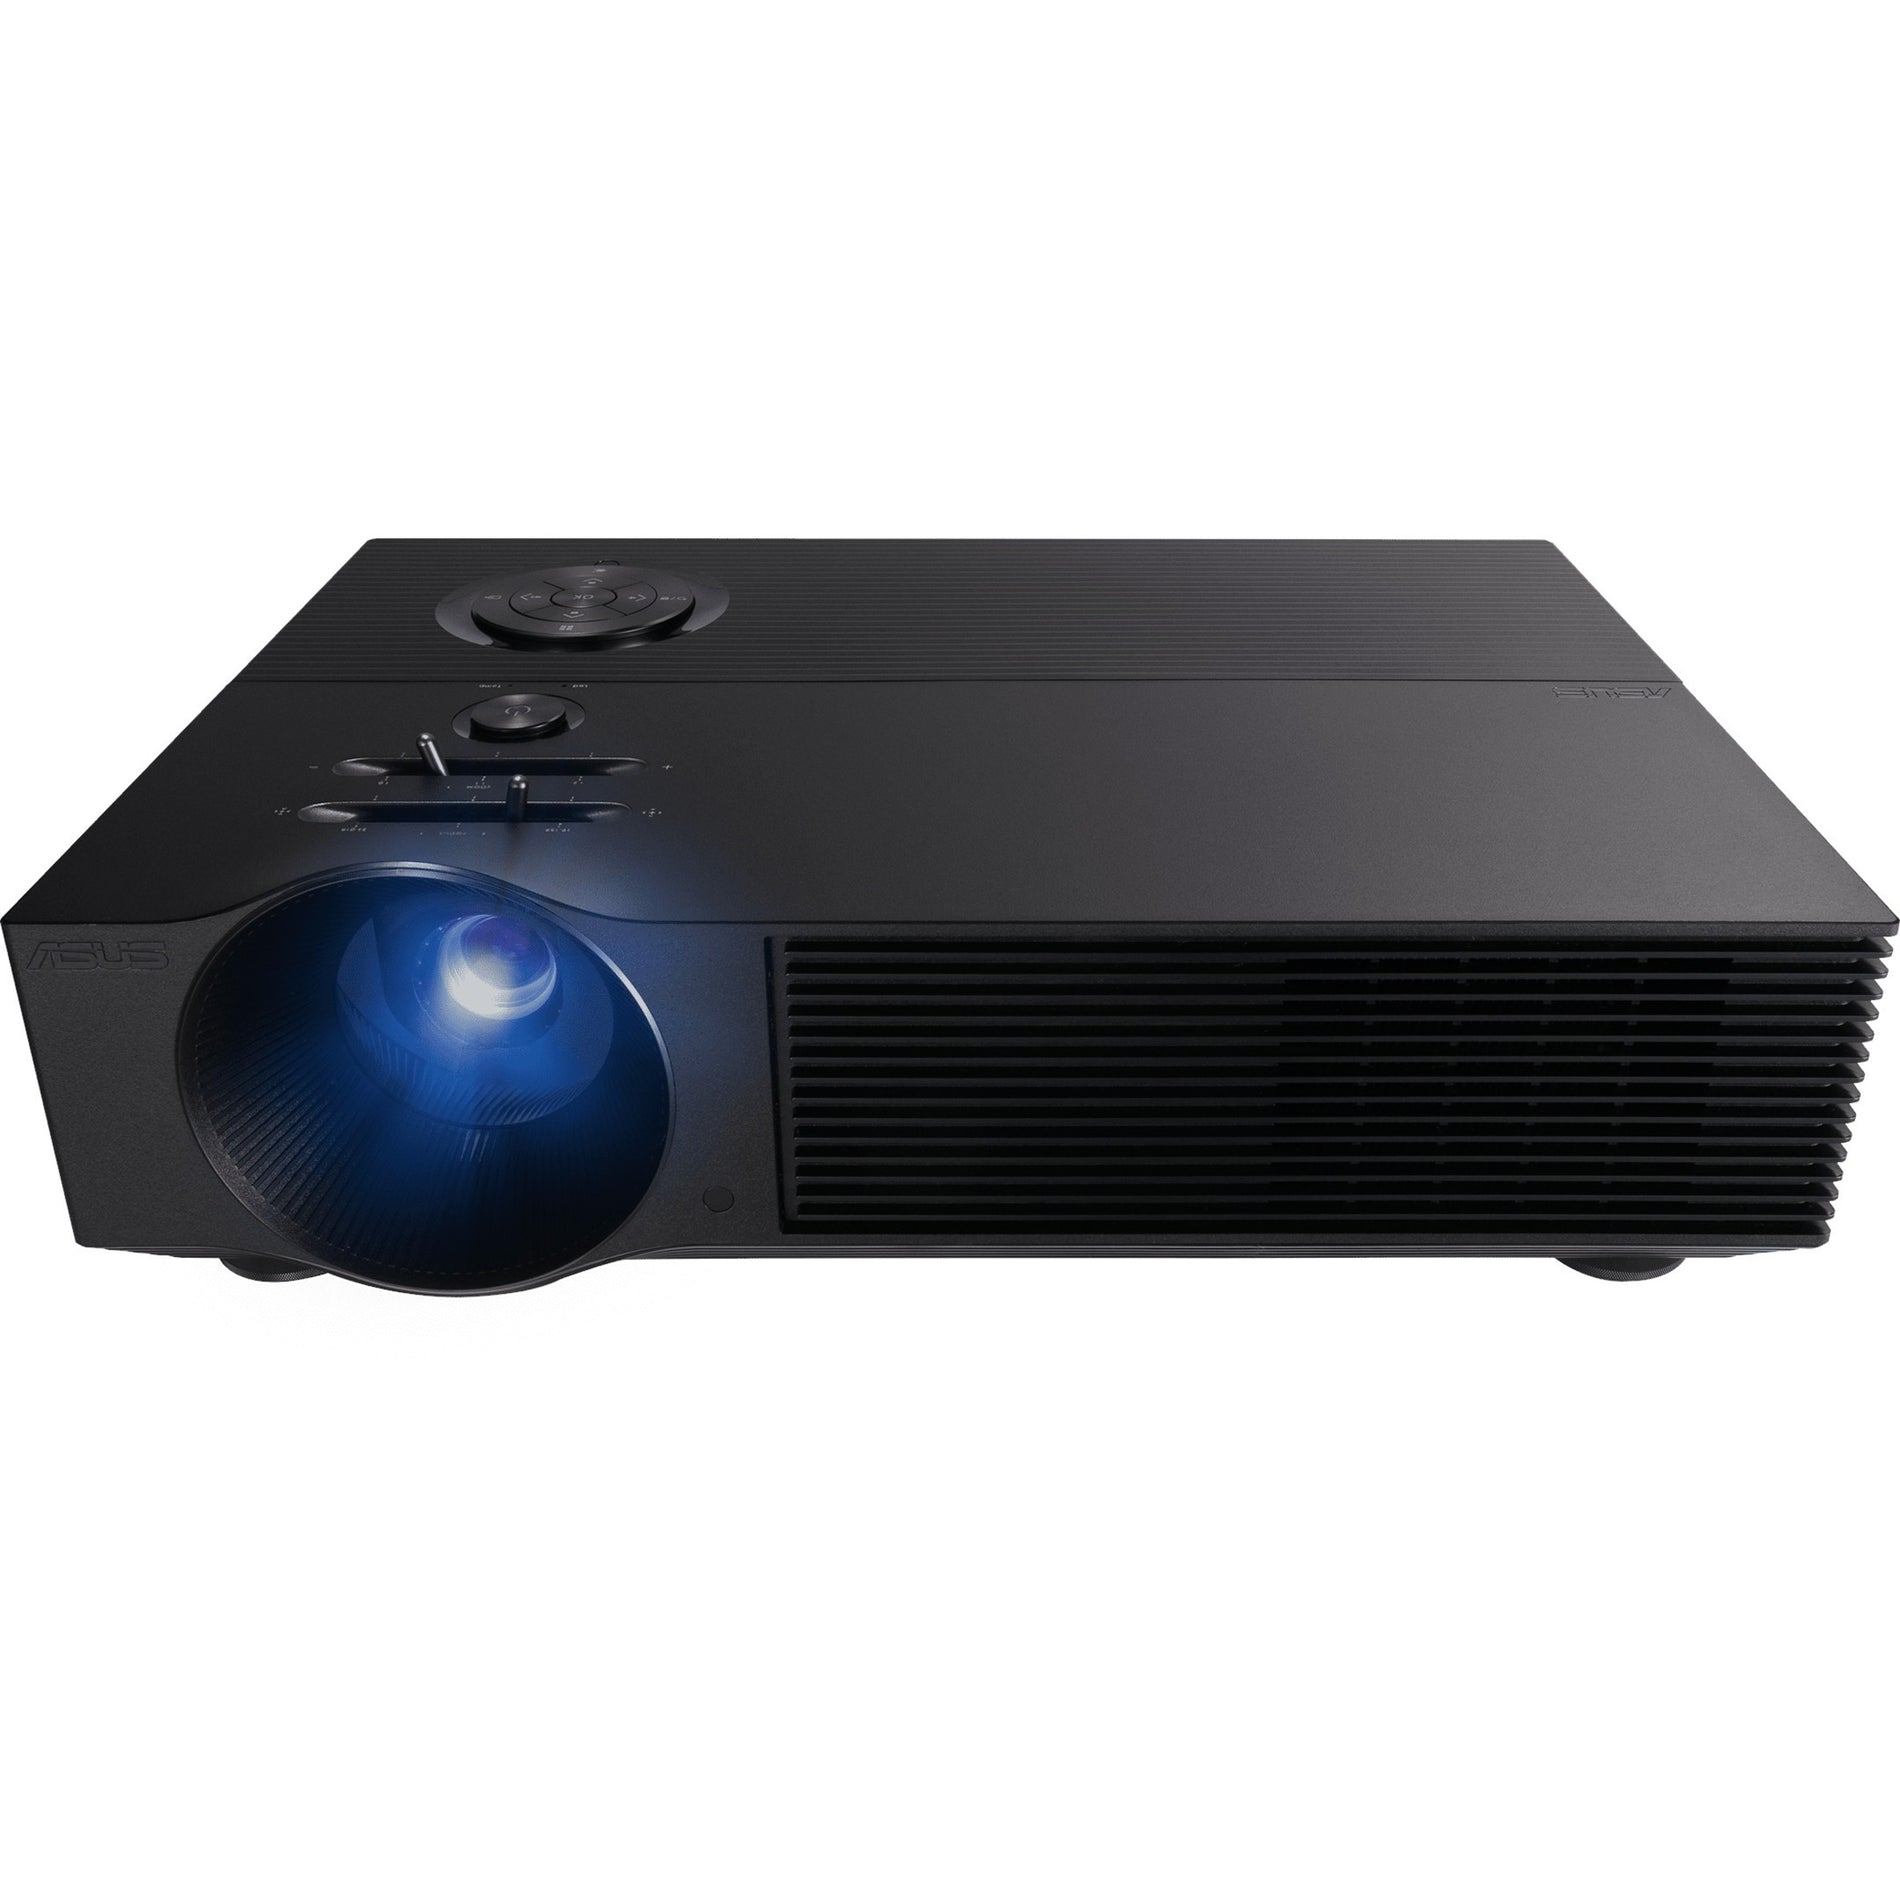 Asus H1Projector H1 DLP Projector, Full HD, 3000 lm, 16:10, 2 Year Warranty